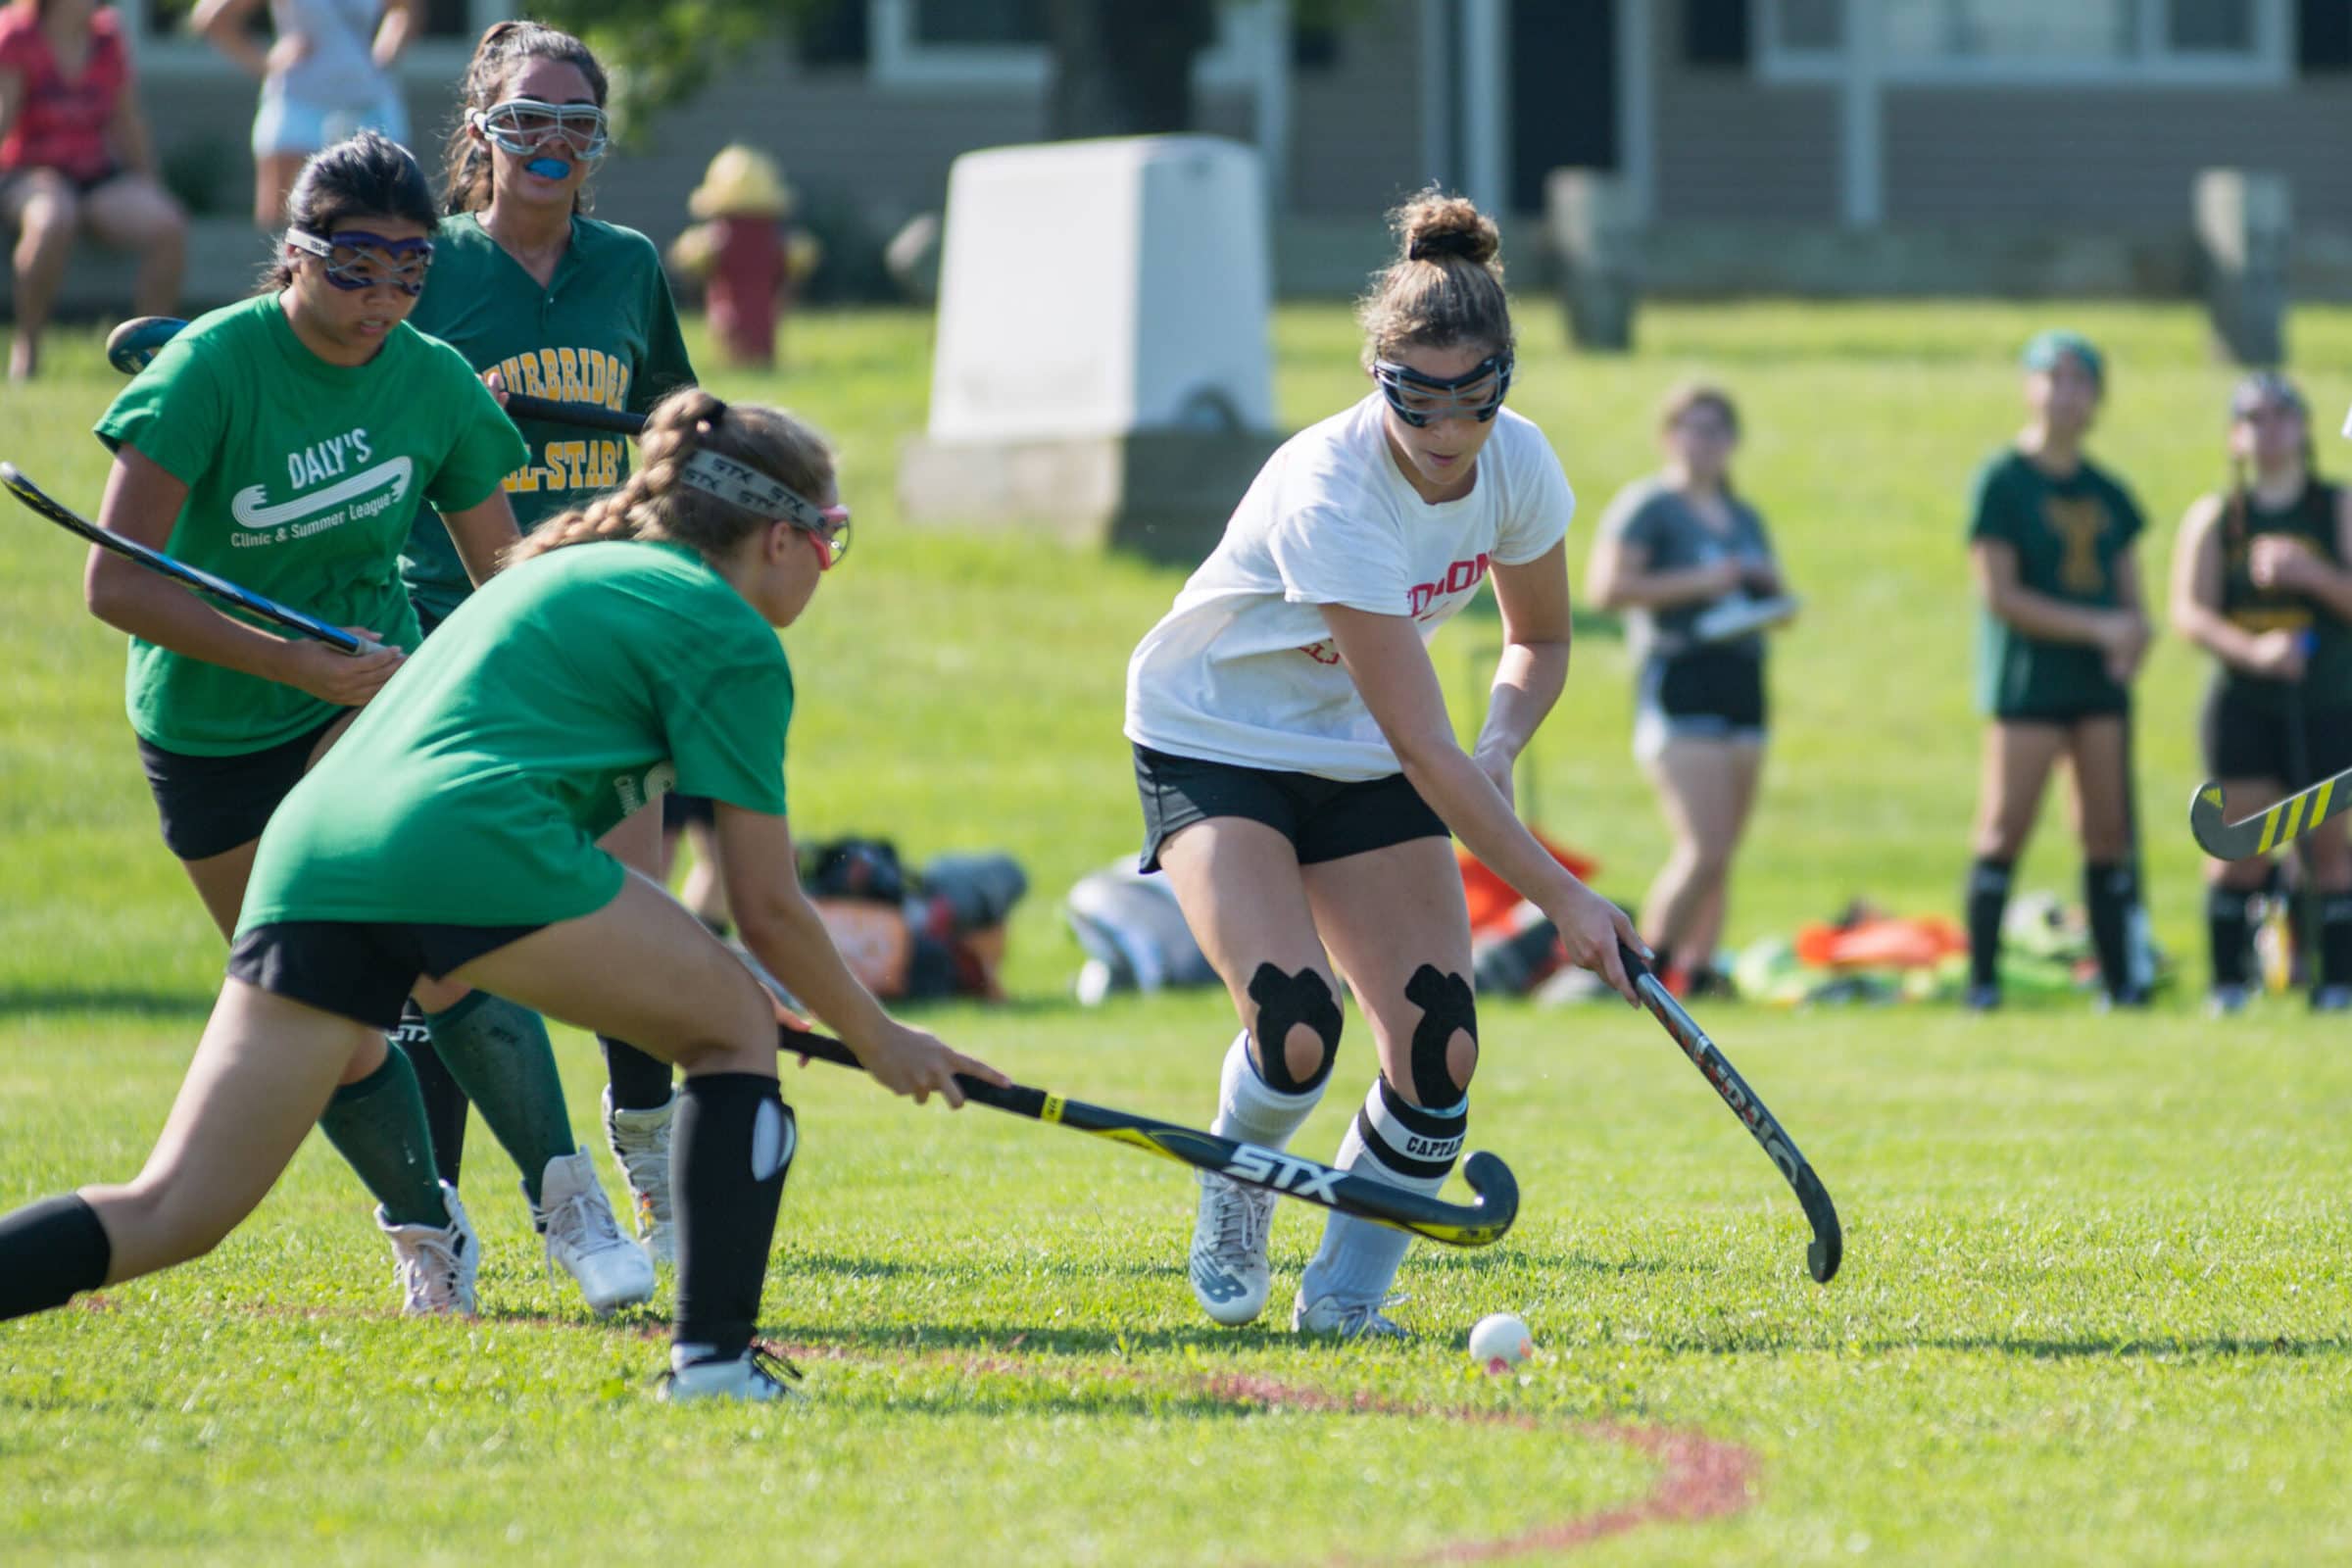 A Hudson field hockey player battles with a Tantasqua opponent for possession. (Photo/Jesse Kucewicz)